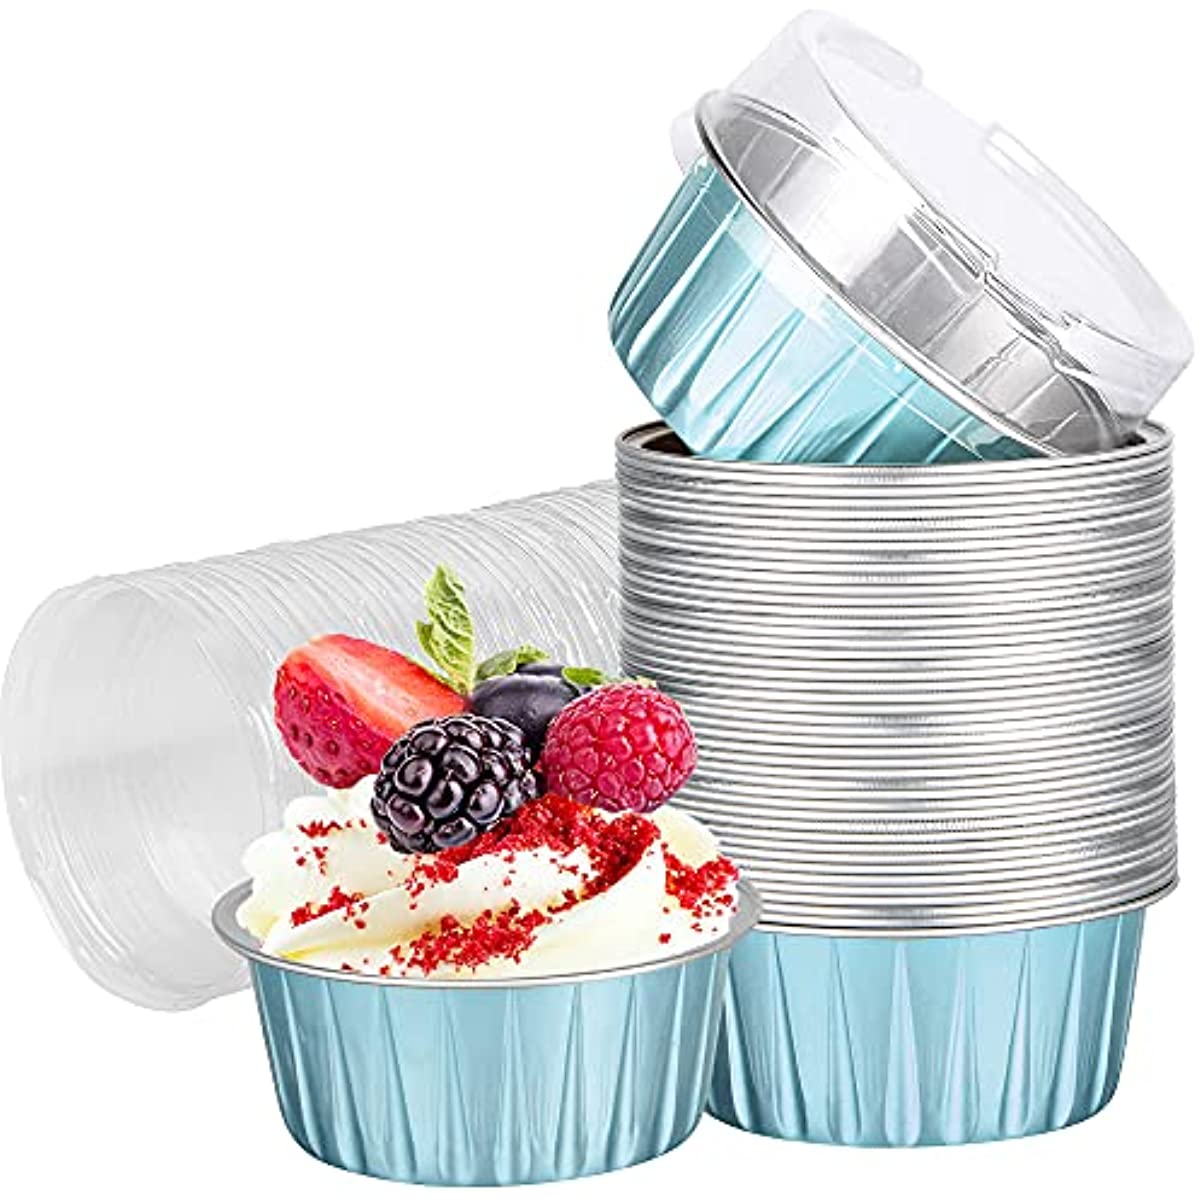 50pcs Foil Cupcake Liners with Lids Round Aluminum Muffin Cake